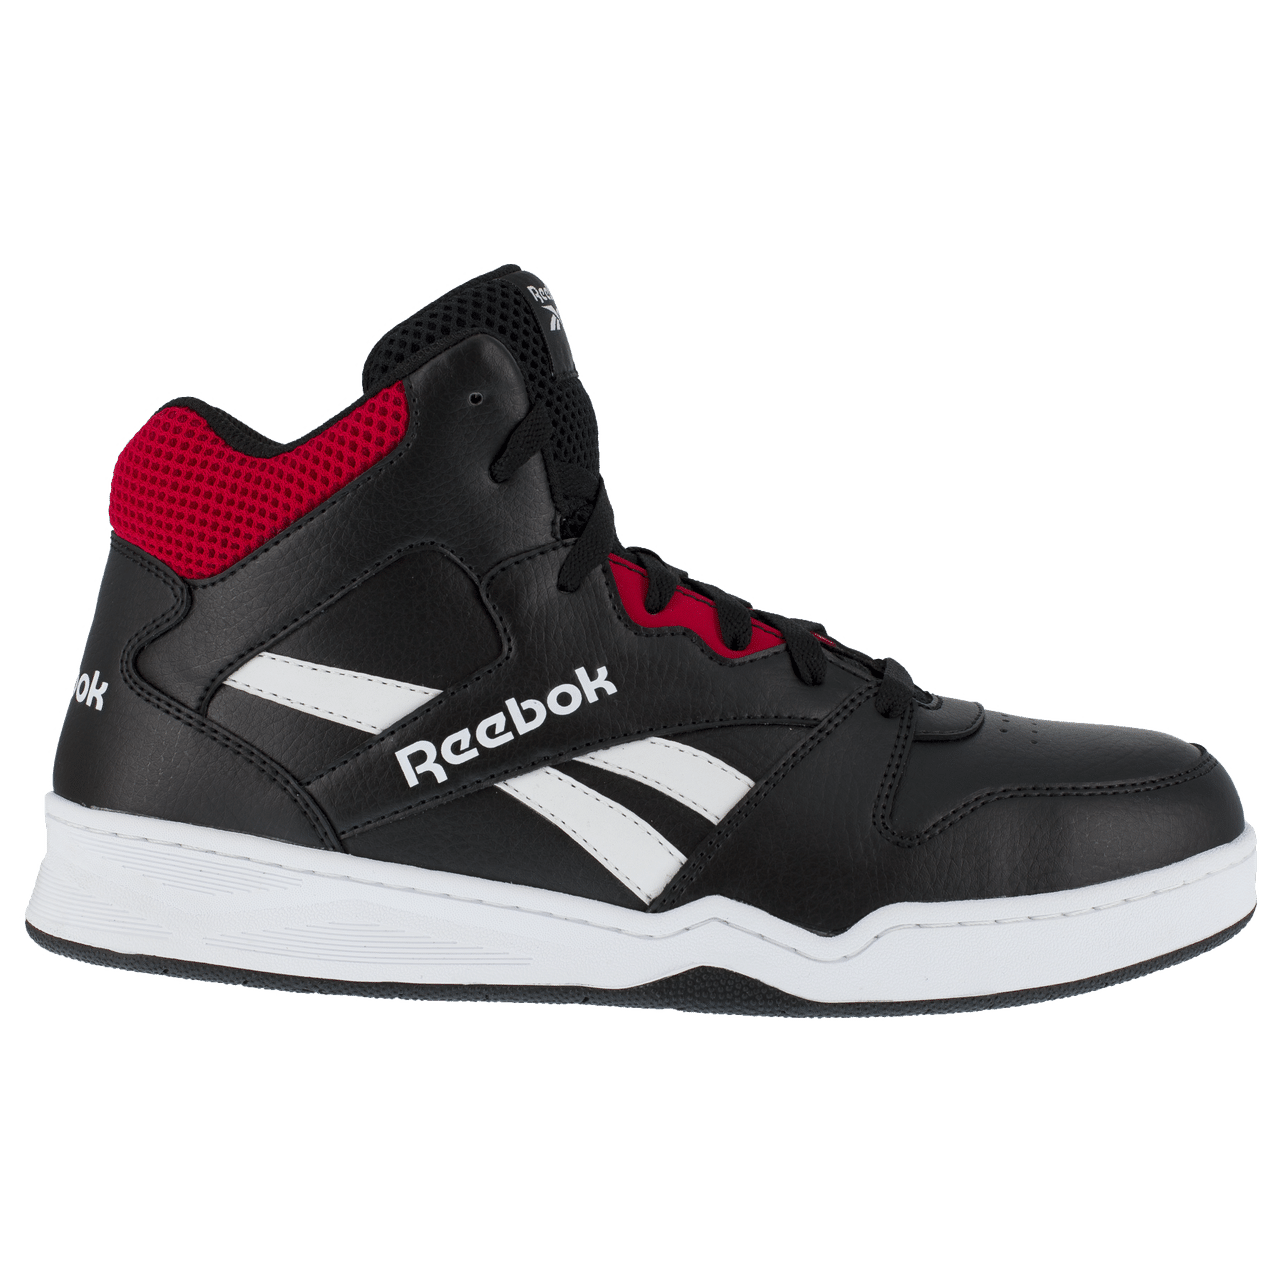 Reebok Leather Athletic Safety Shoes